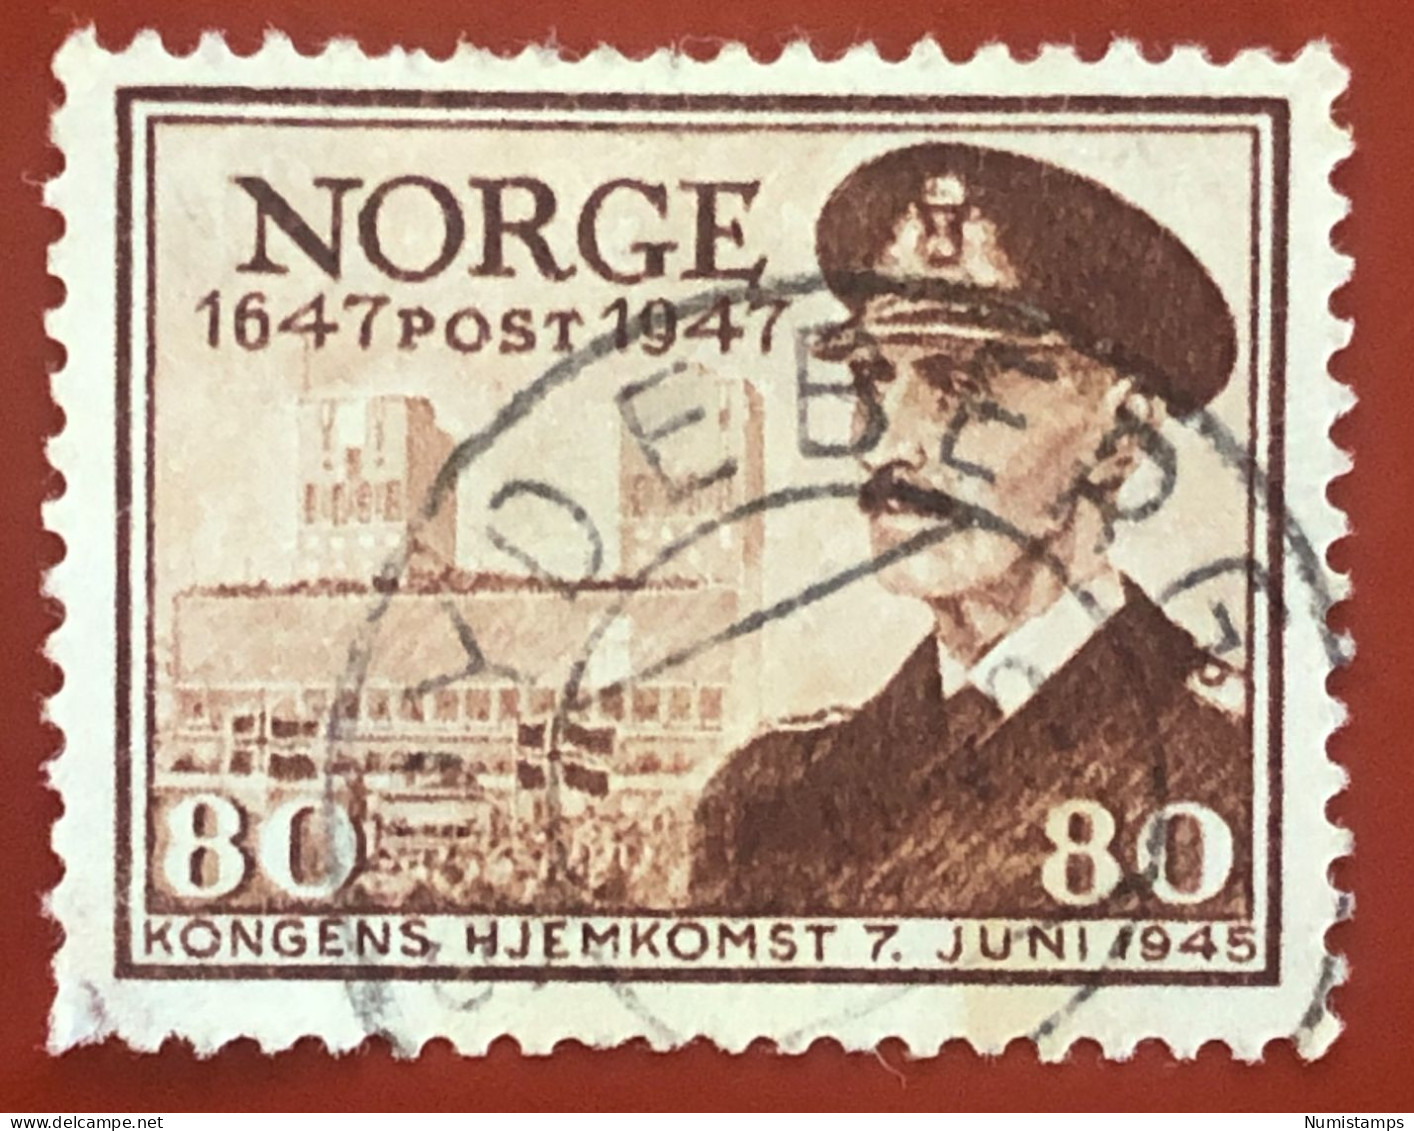 Norway - Postal Service - 1947 - Used Stamps